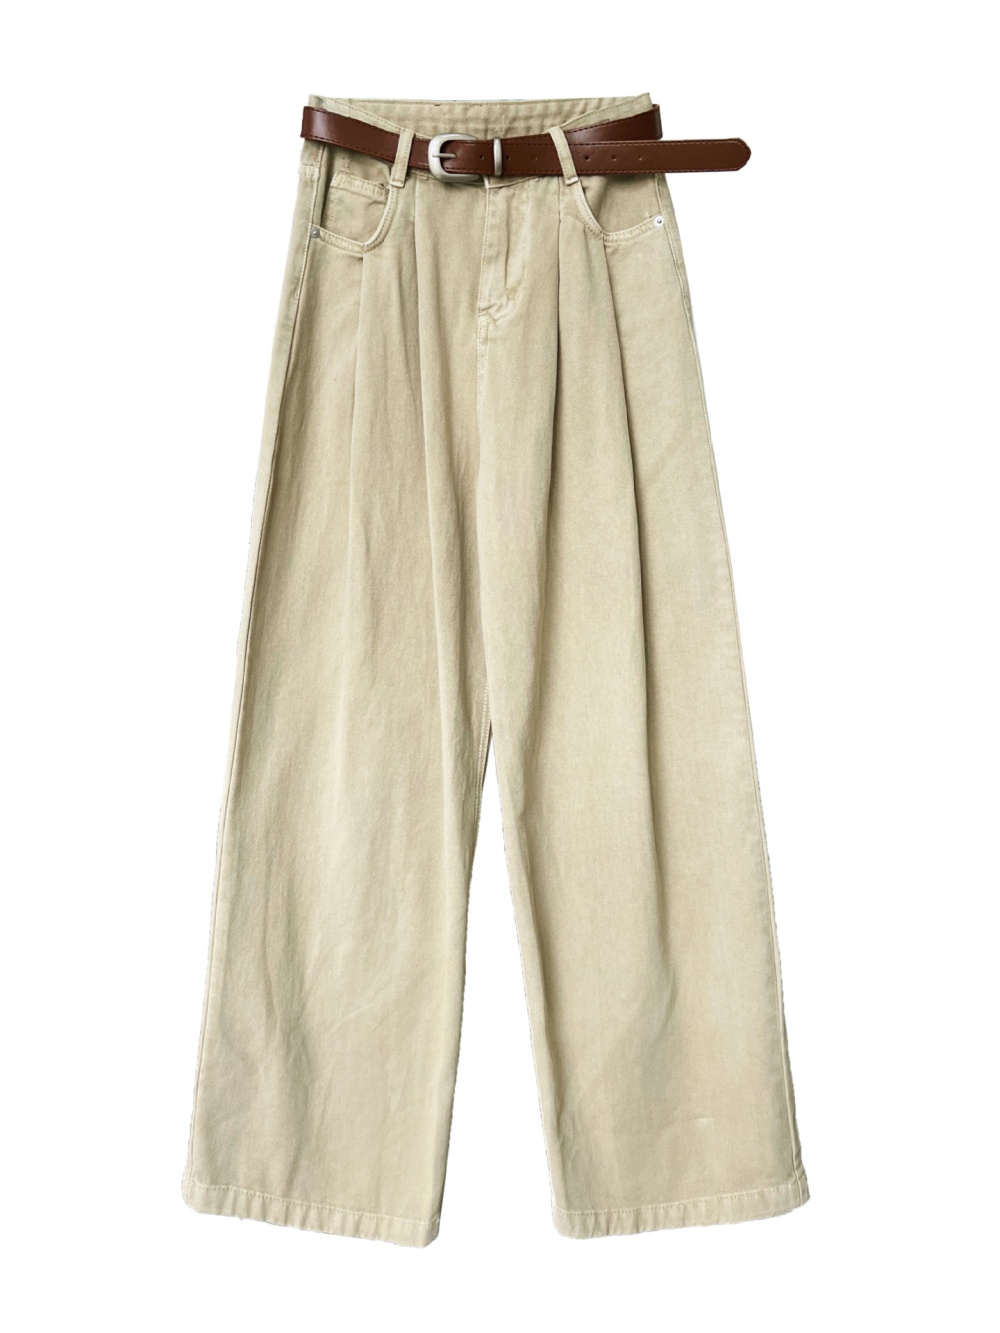 Retro mopping long pants wide leg Casual jeans for women